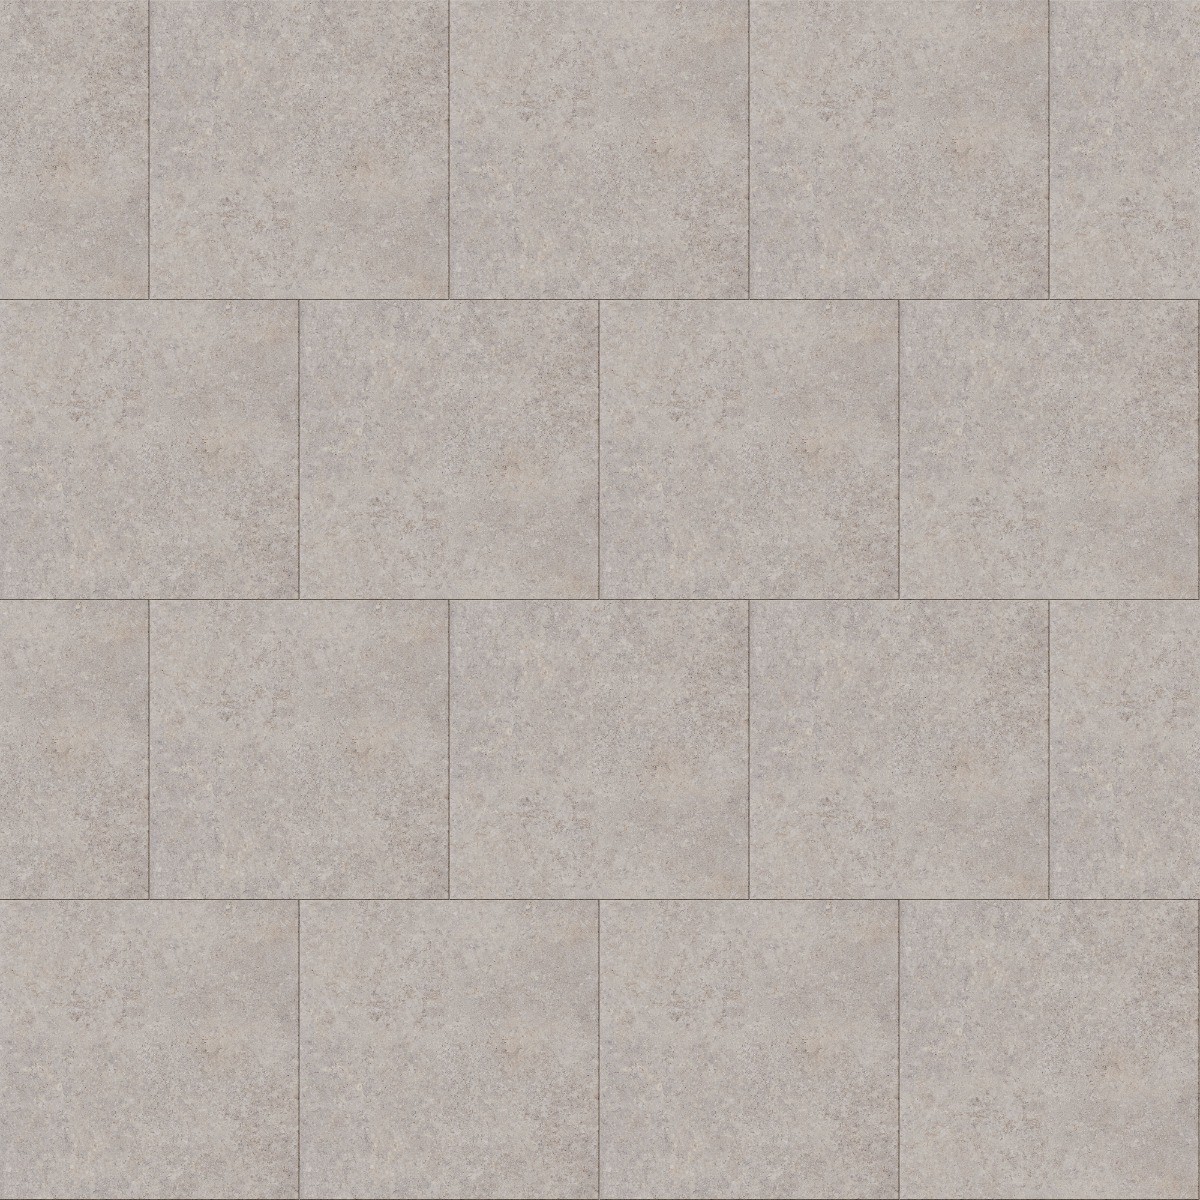 A seamless tile texture with zimba beige str porcelain tile tiles arranged in a Stretcher pattern